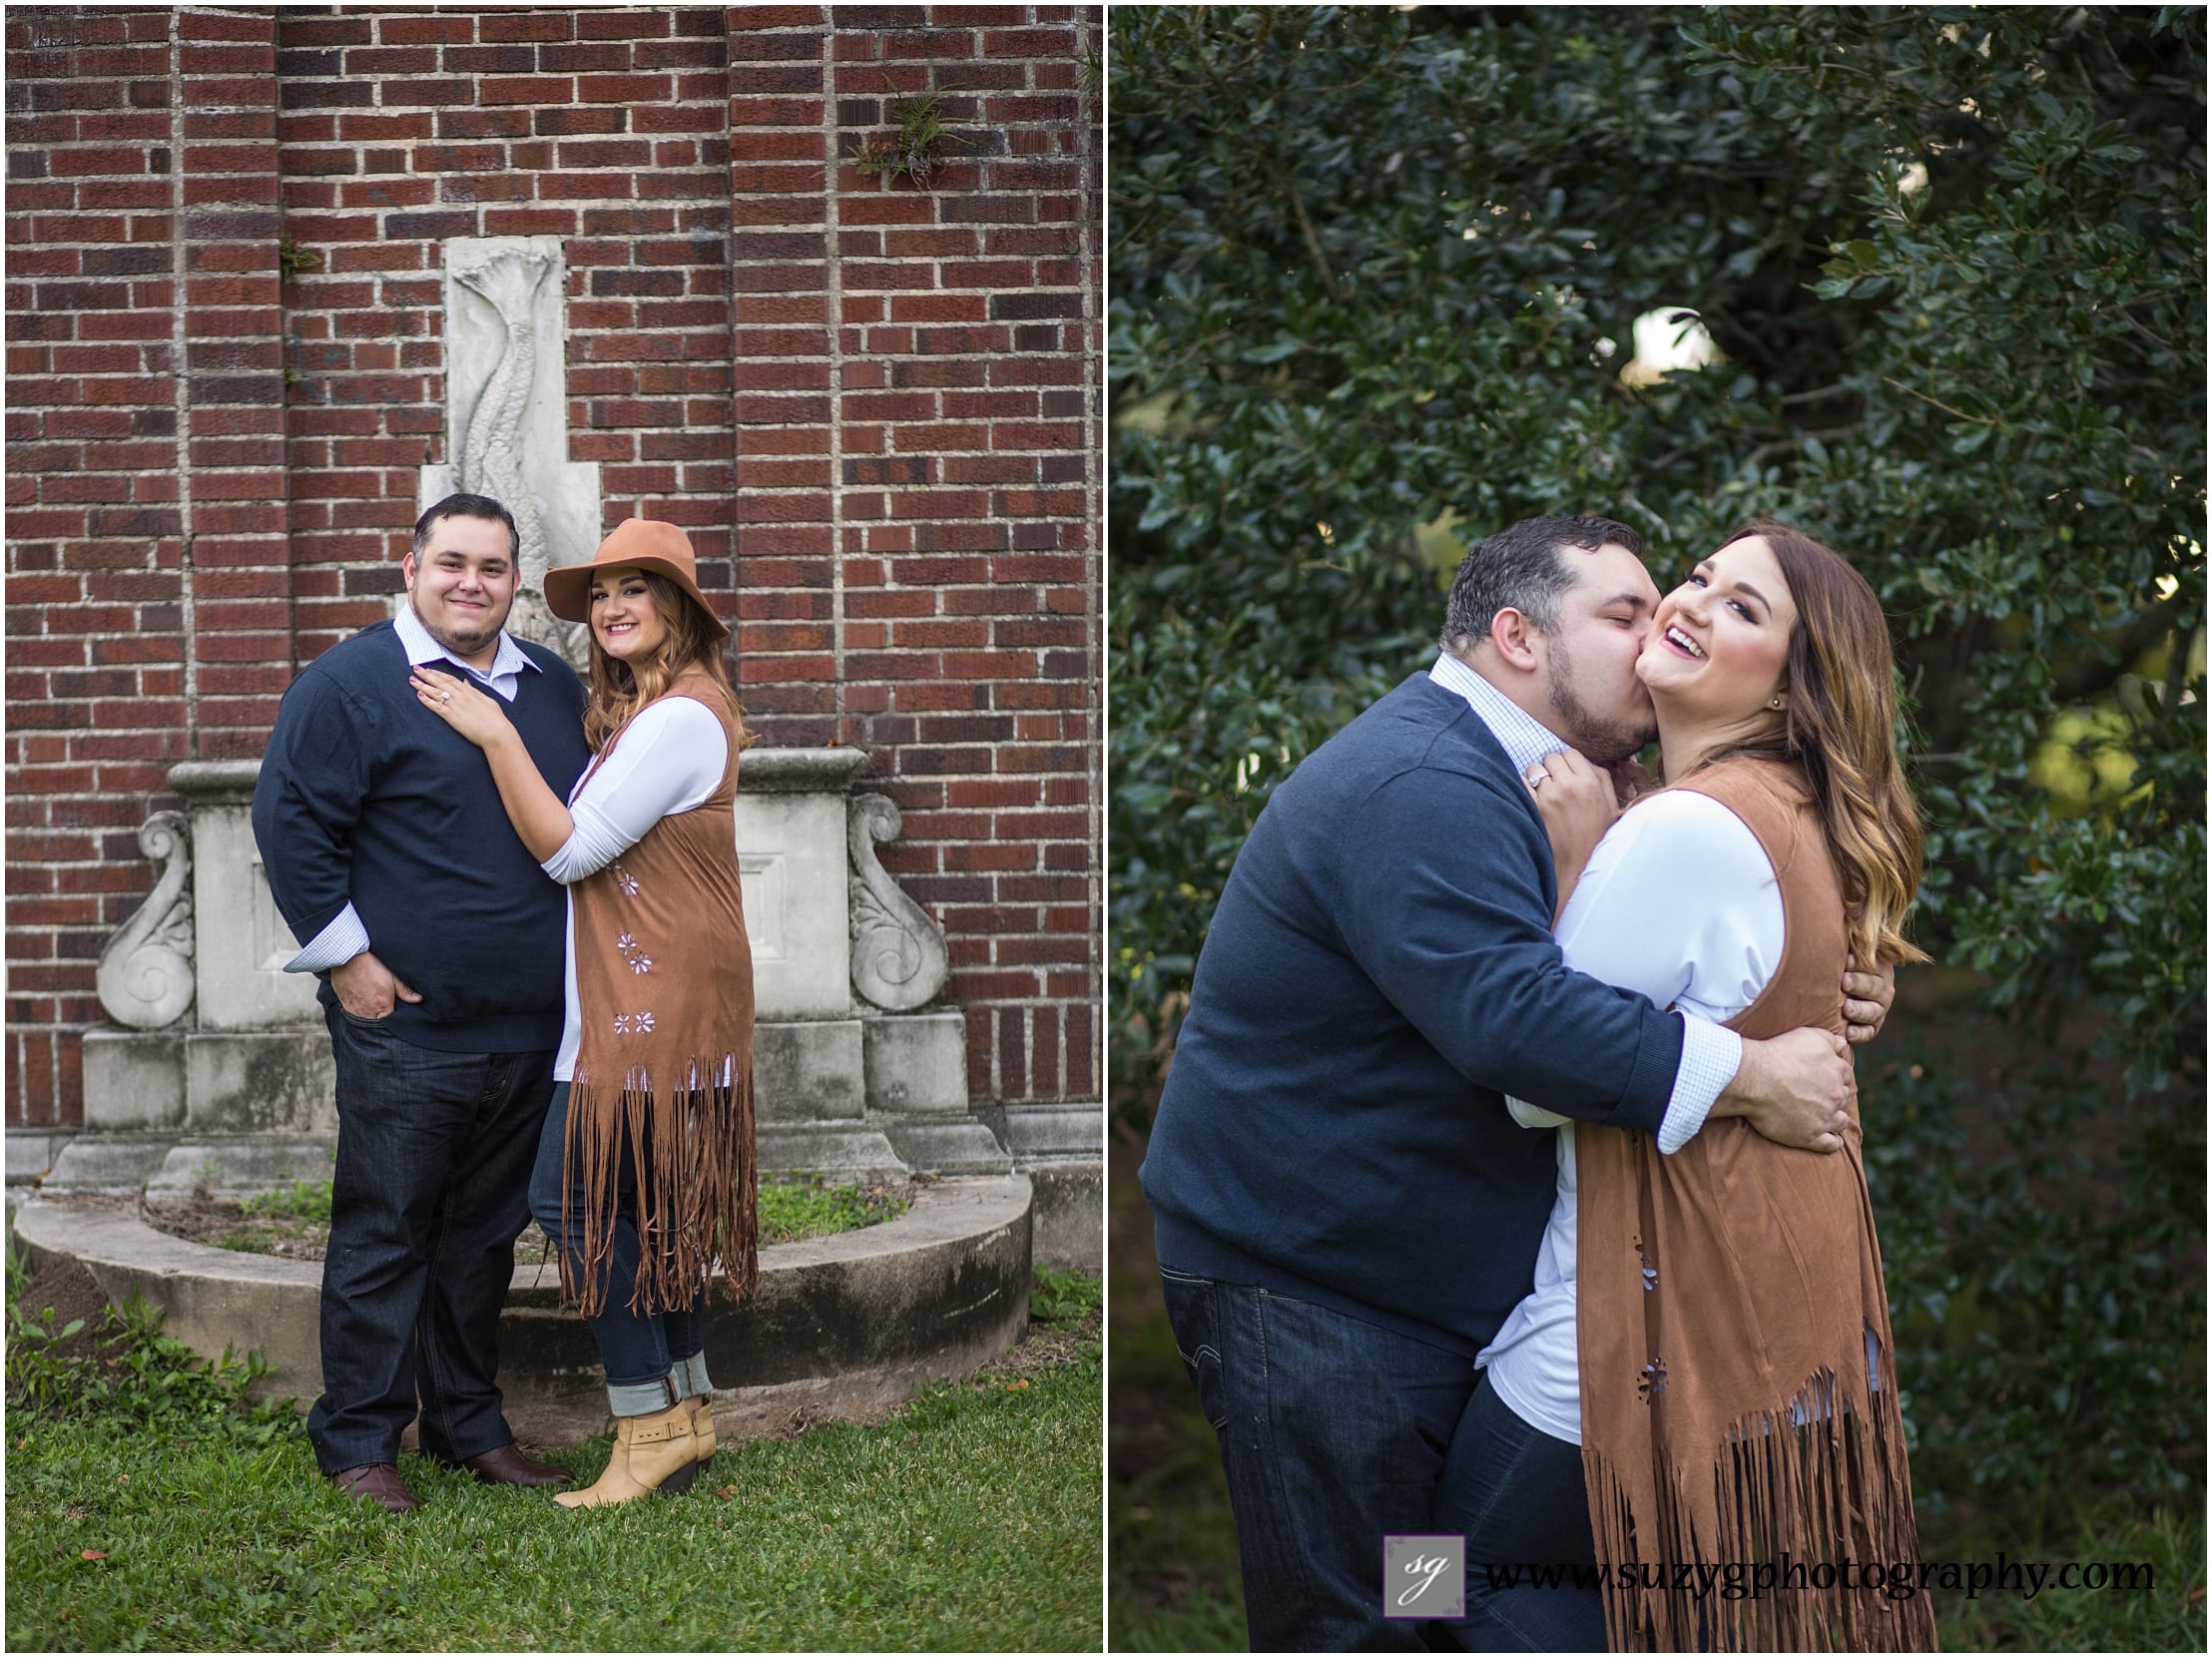 Engagement Session- New Orleans-louisiana wedding photographer-wedding photography-suzy-g-photography-weddings_0021 (2)